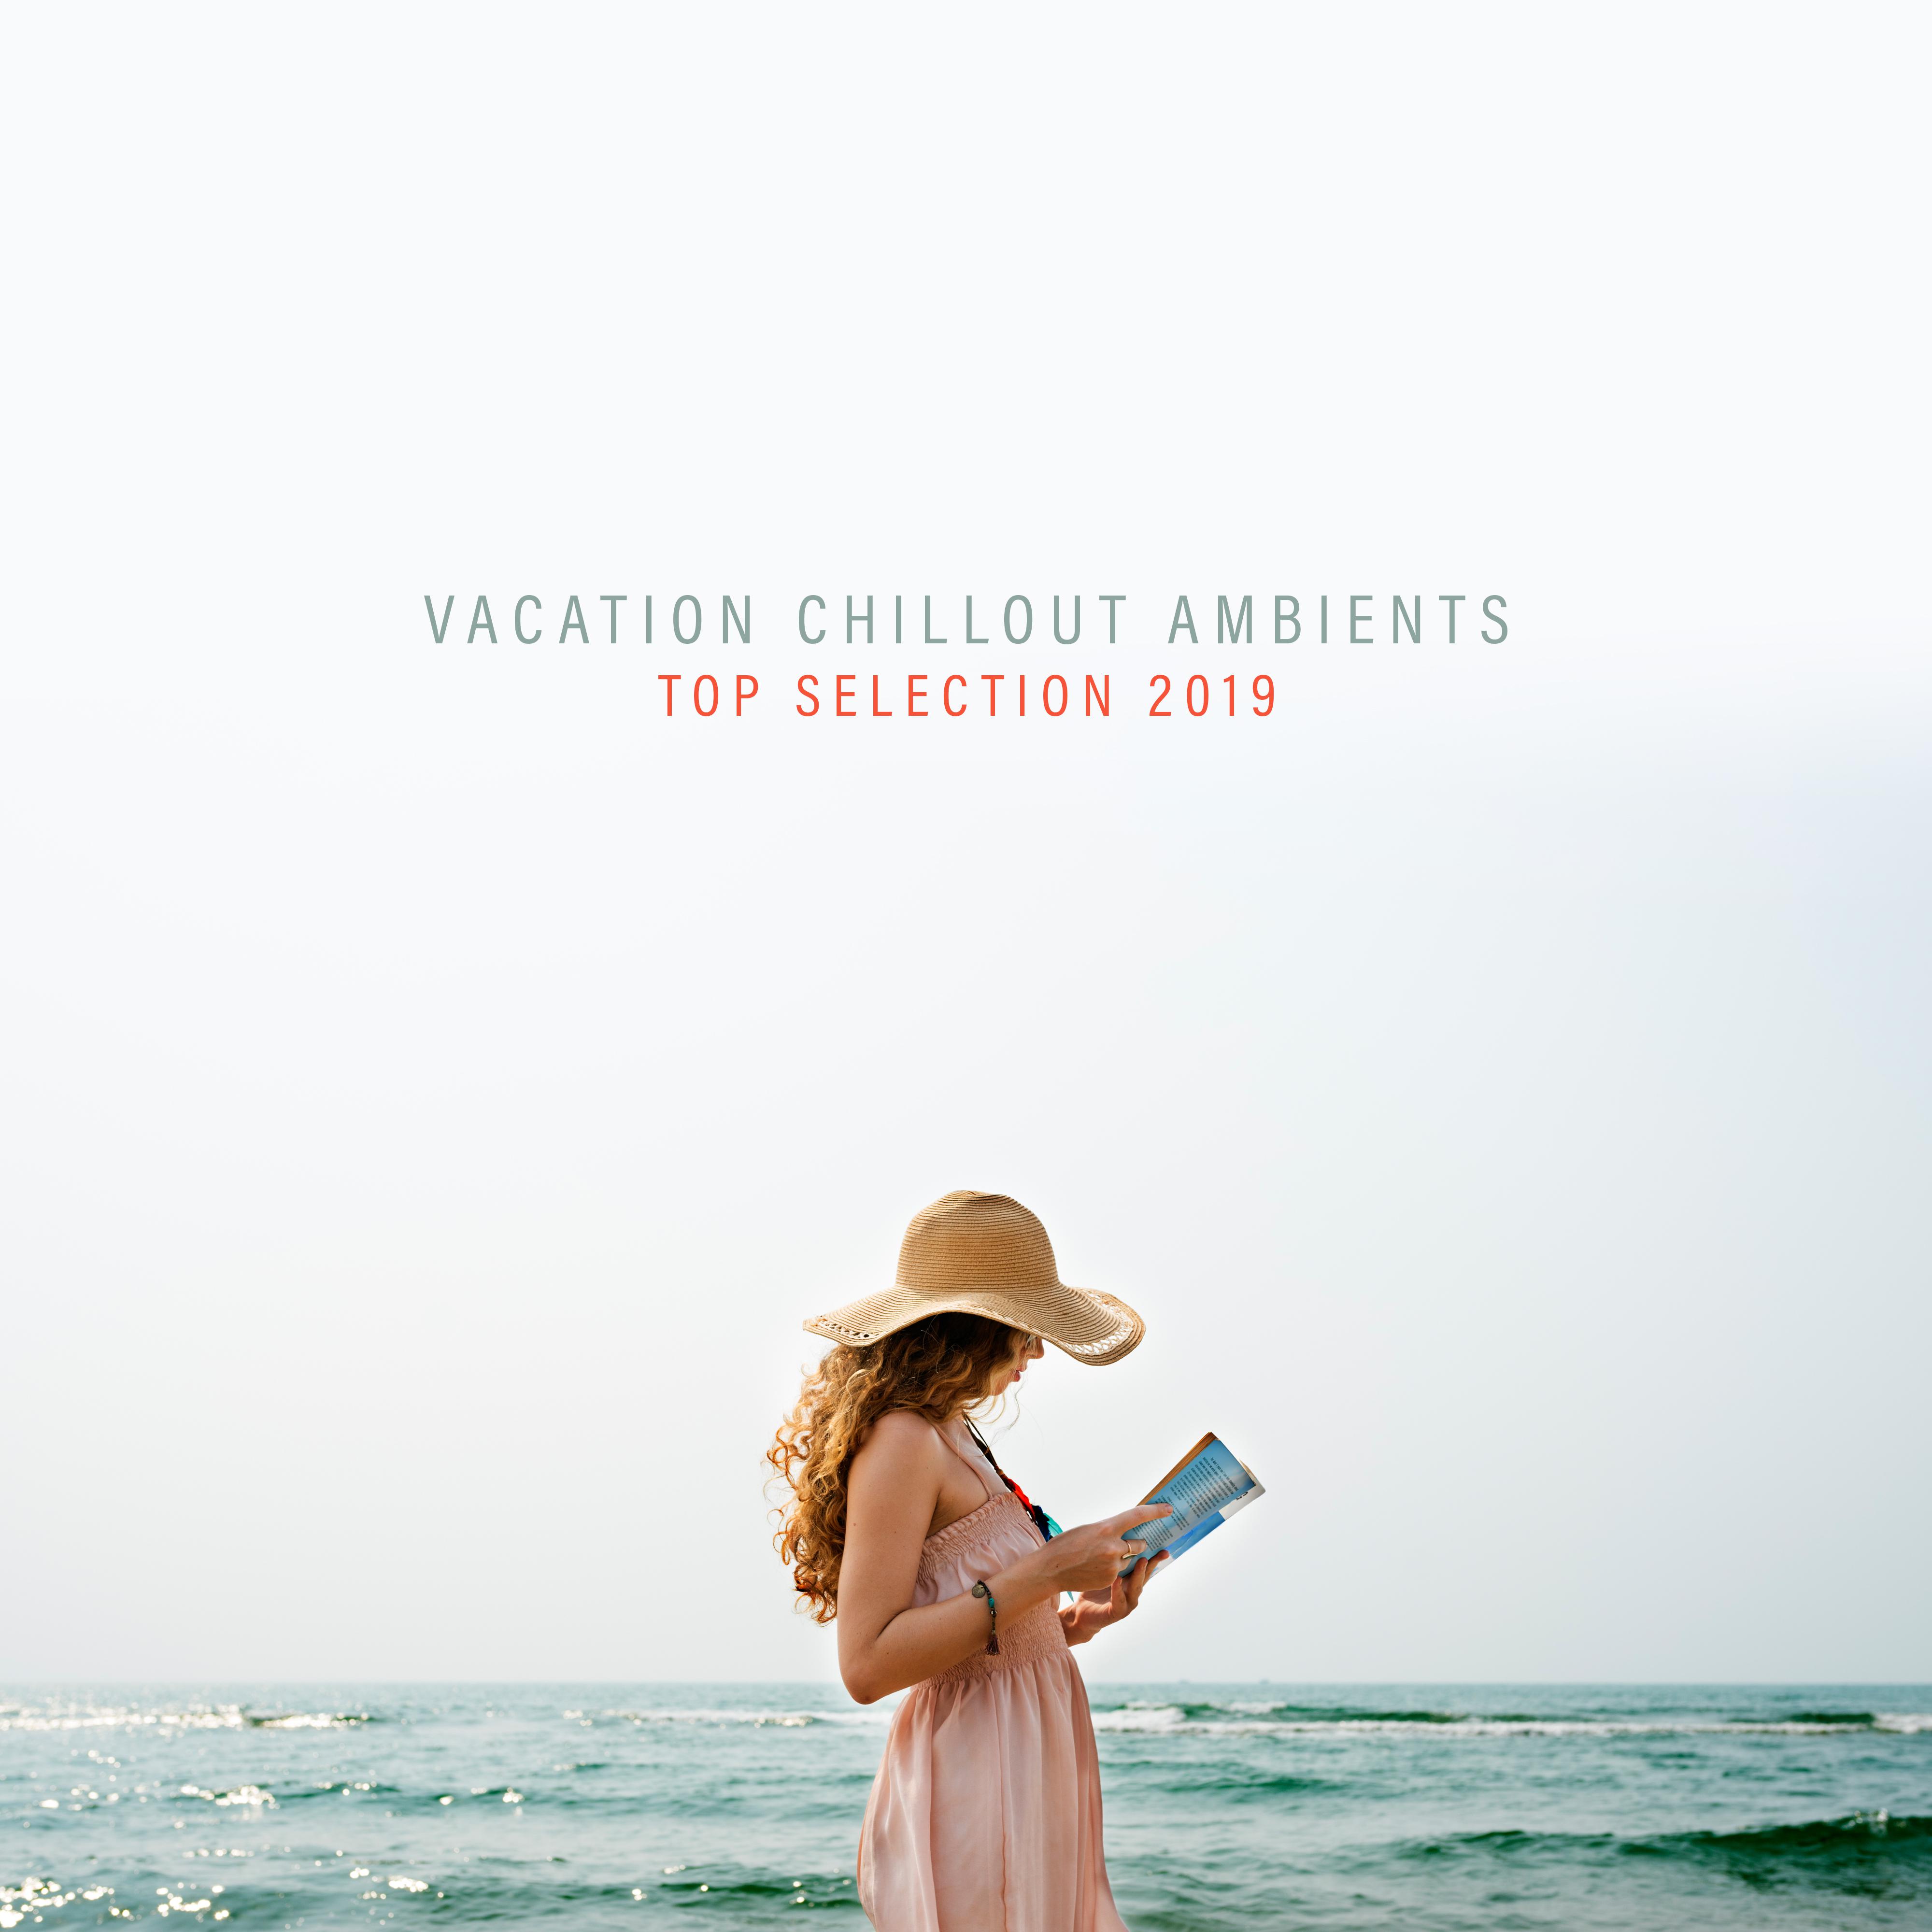 Vacation Chillout Ambients Top Selection 2019